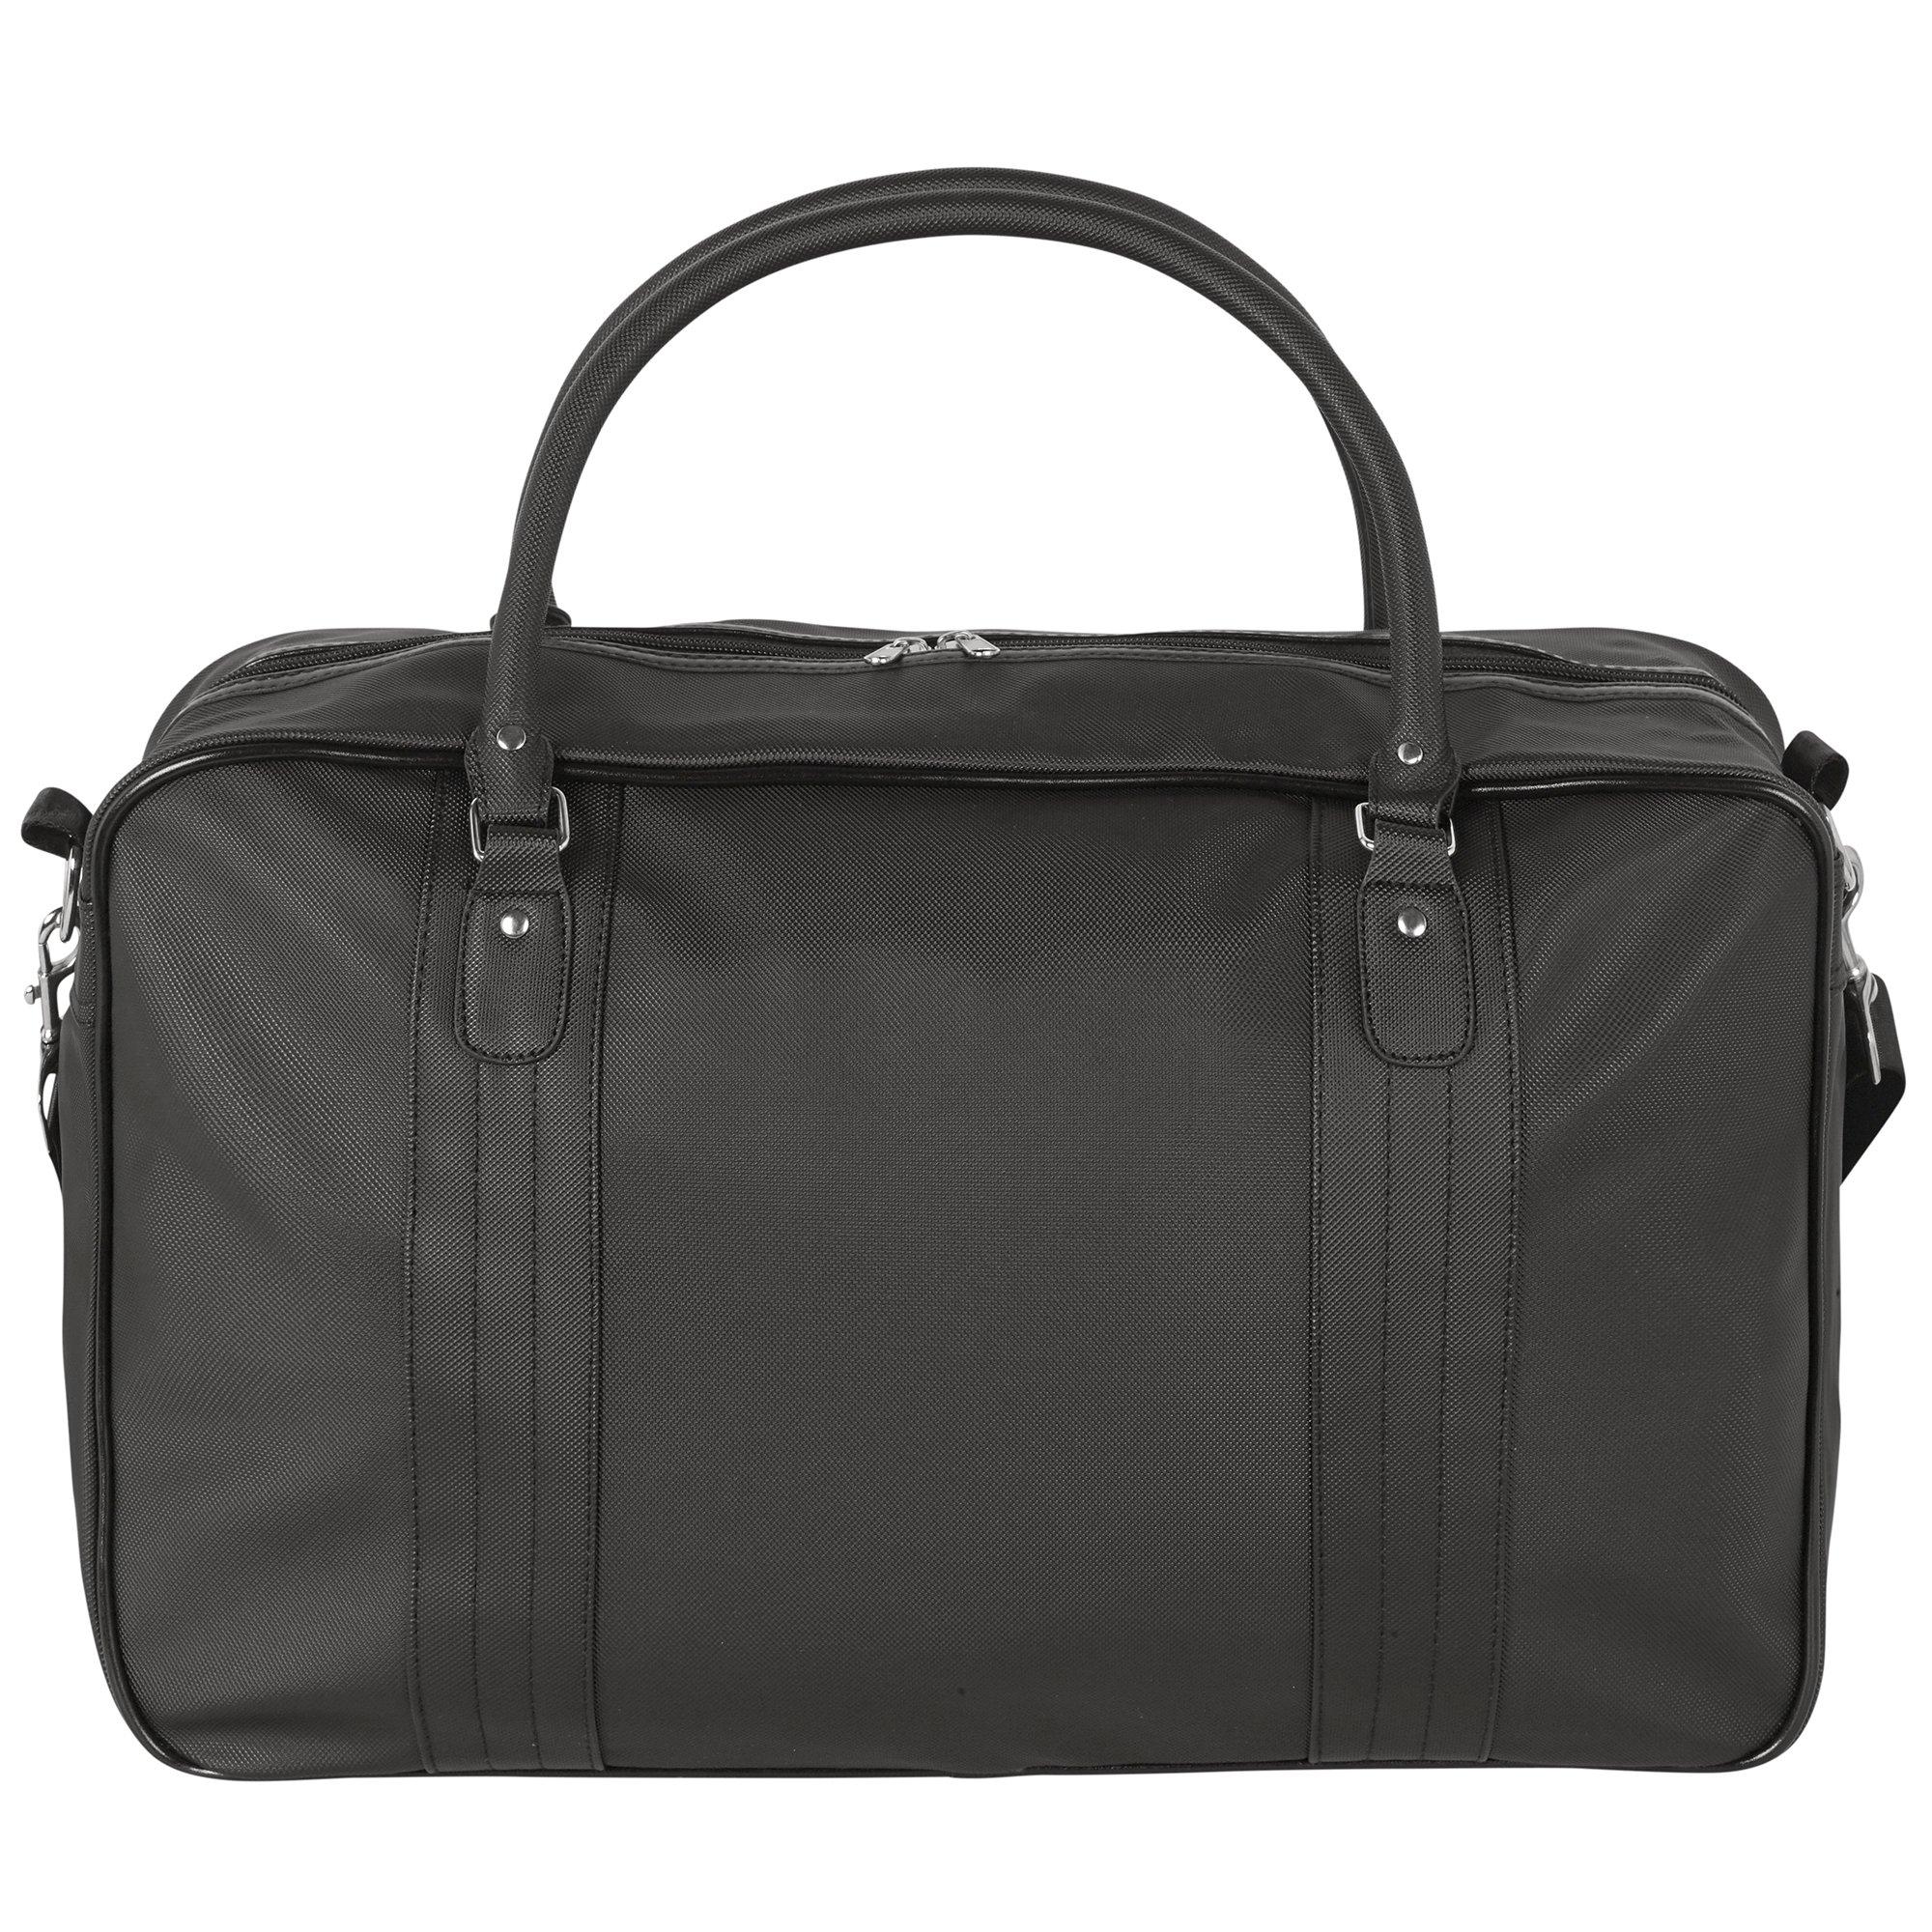 Arsenal Black Faux Leather Holdall Bag | Official Arsenal Online Store